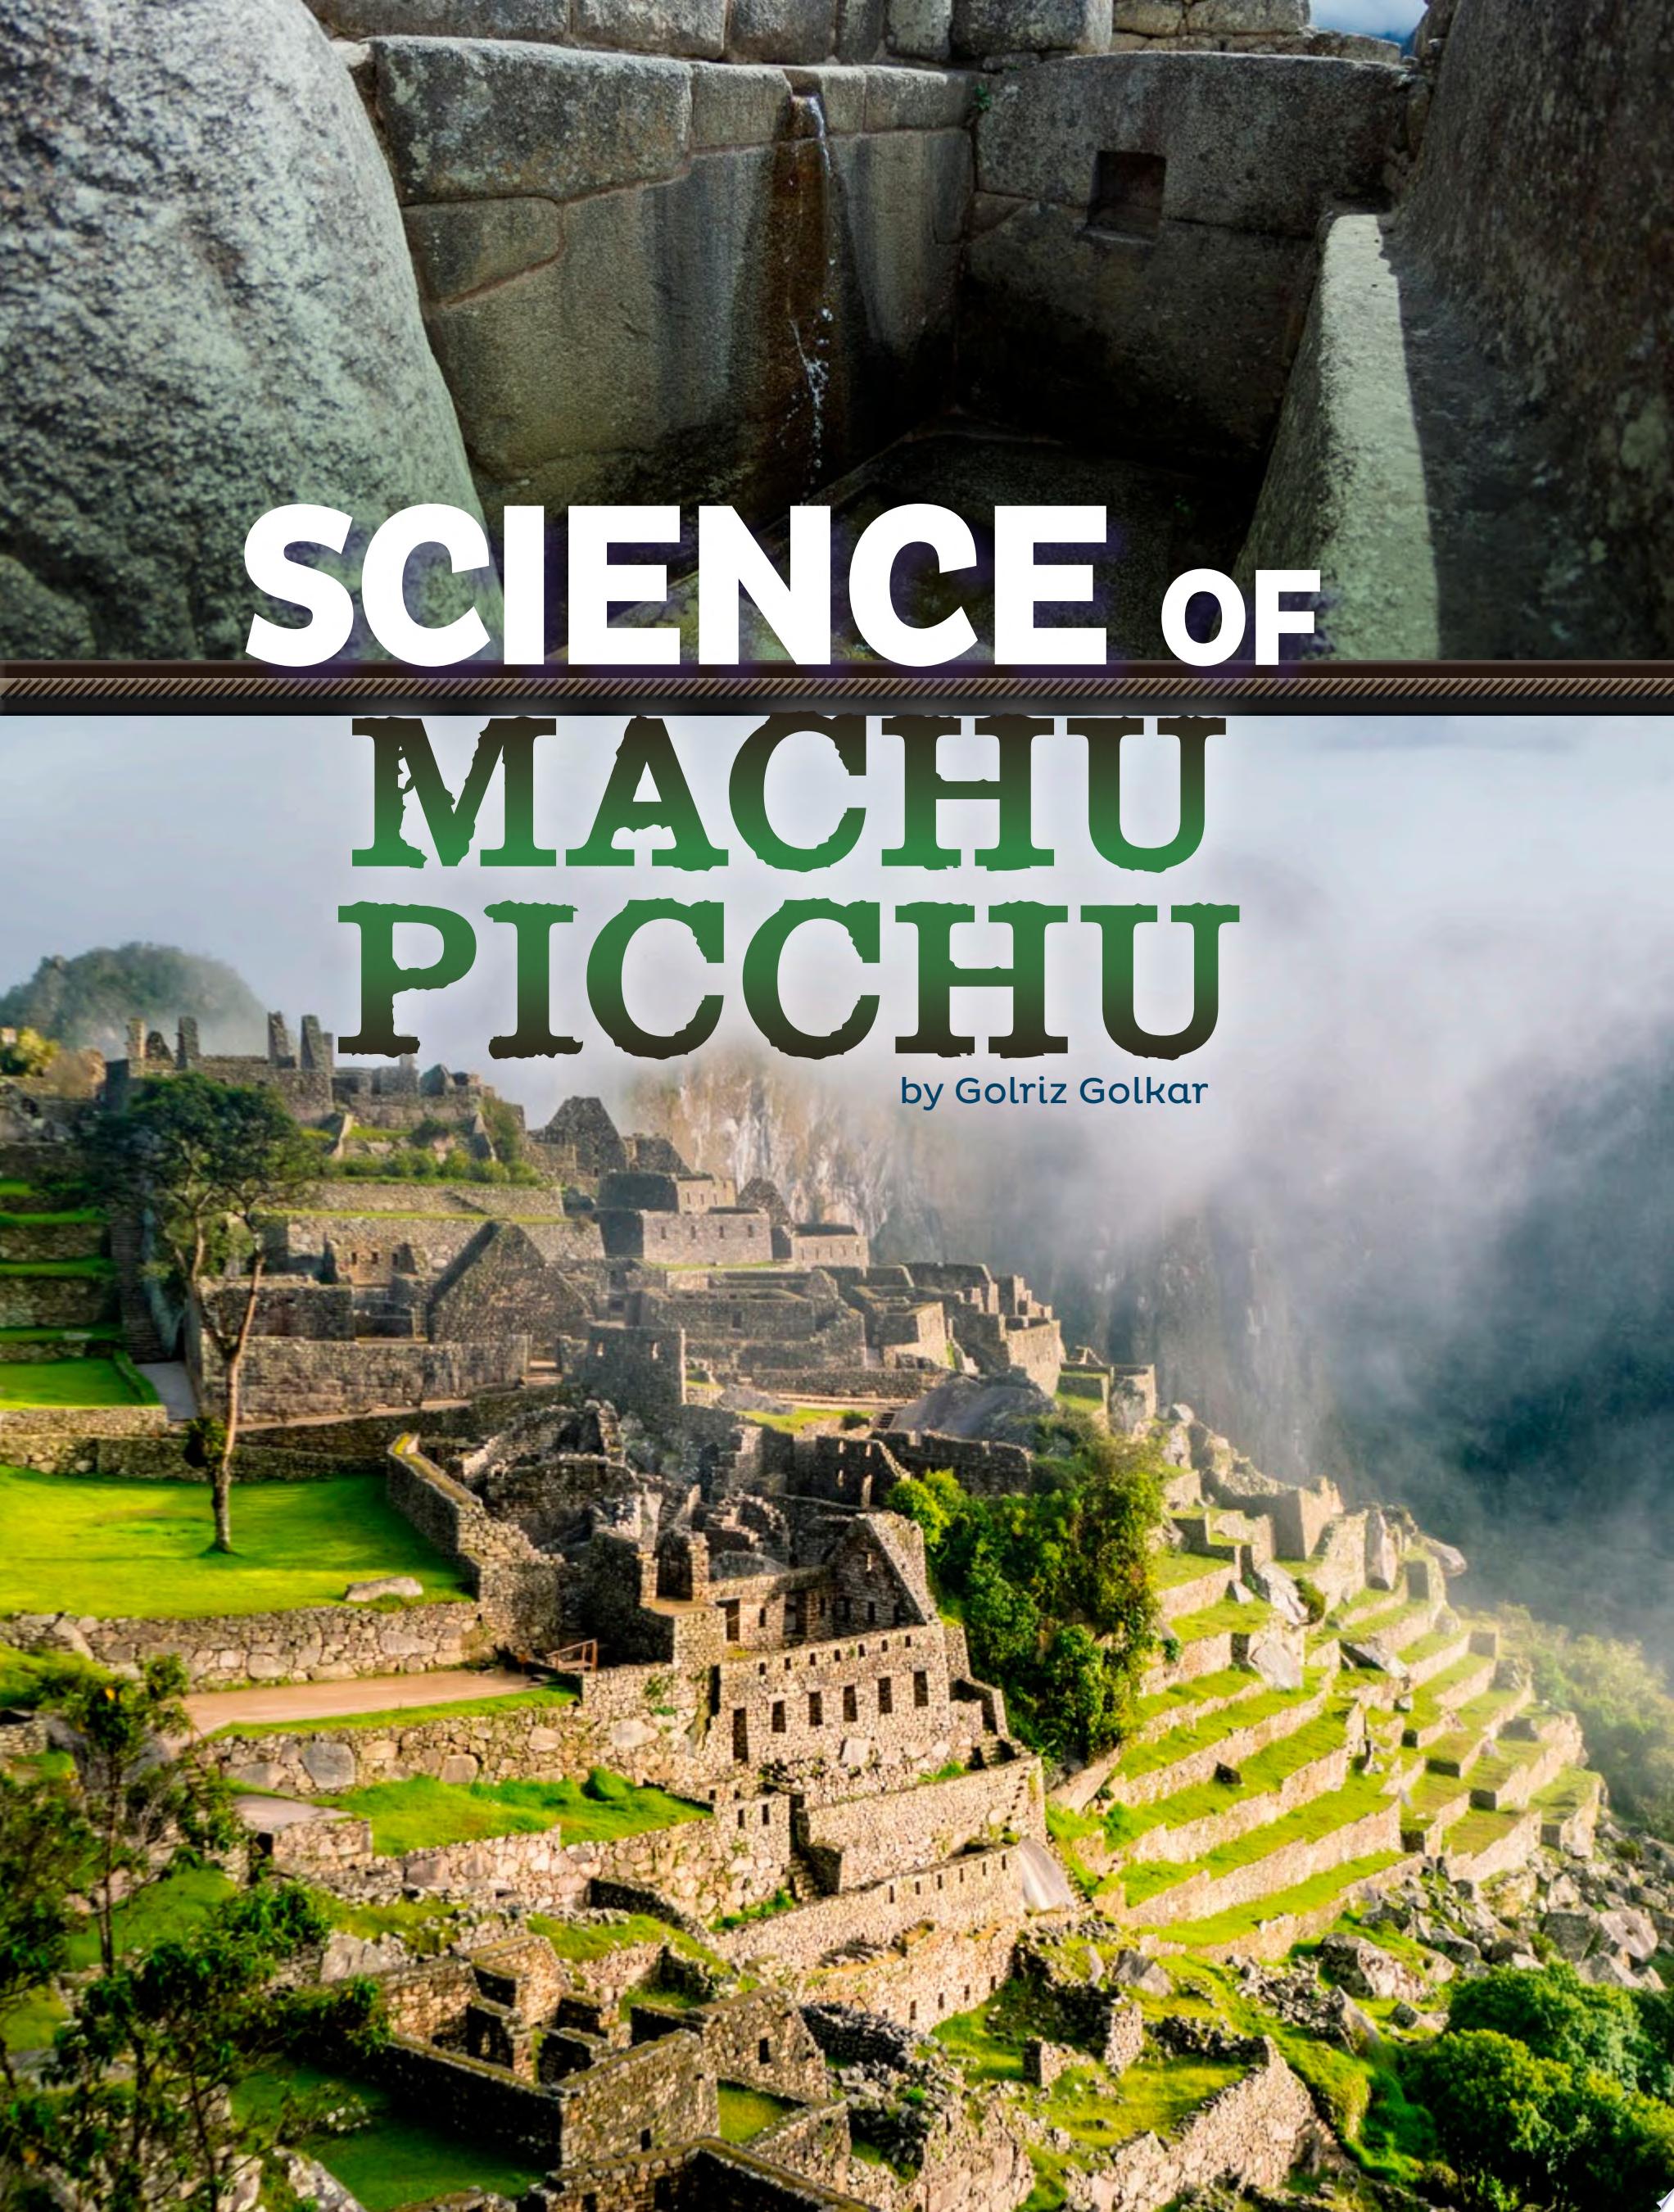 Image for "Science of Machu Picchu"